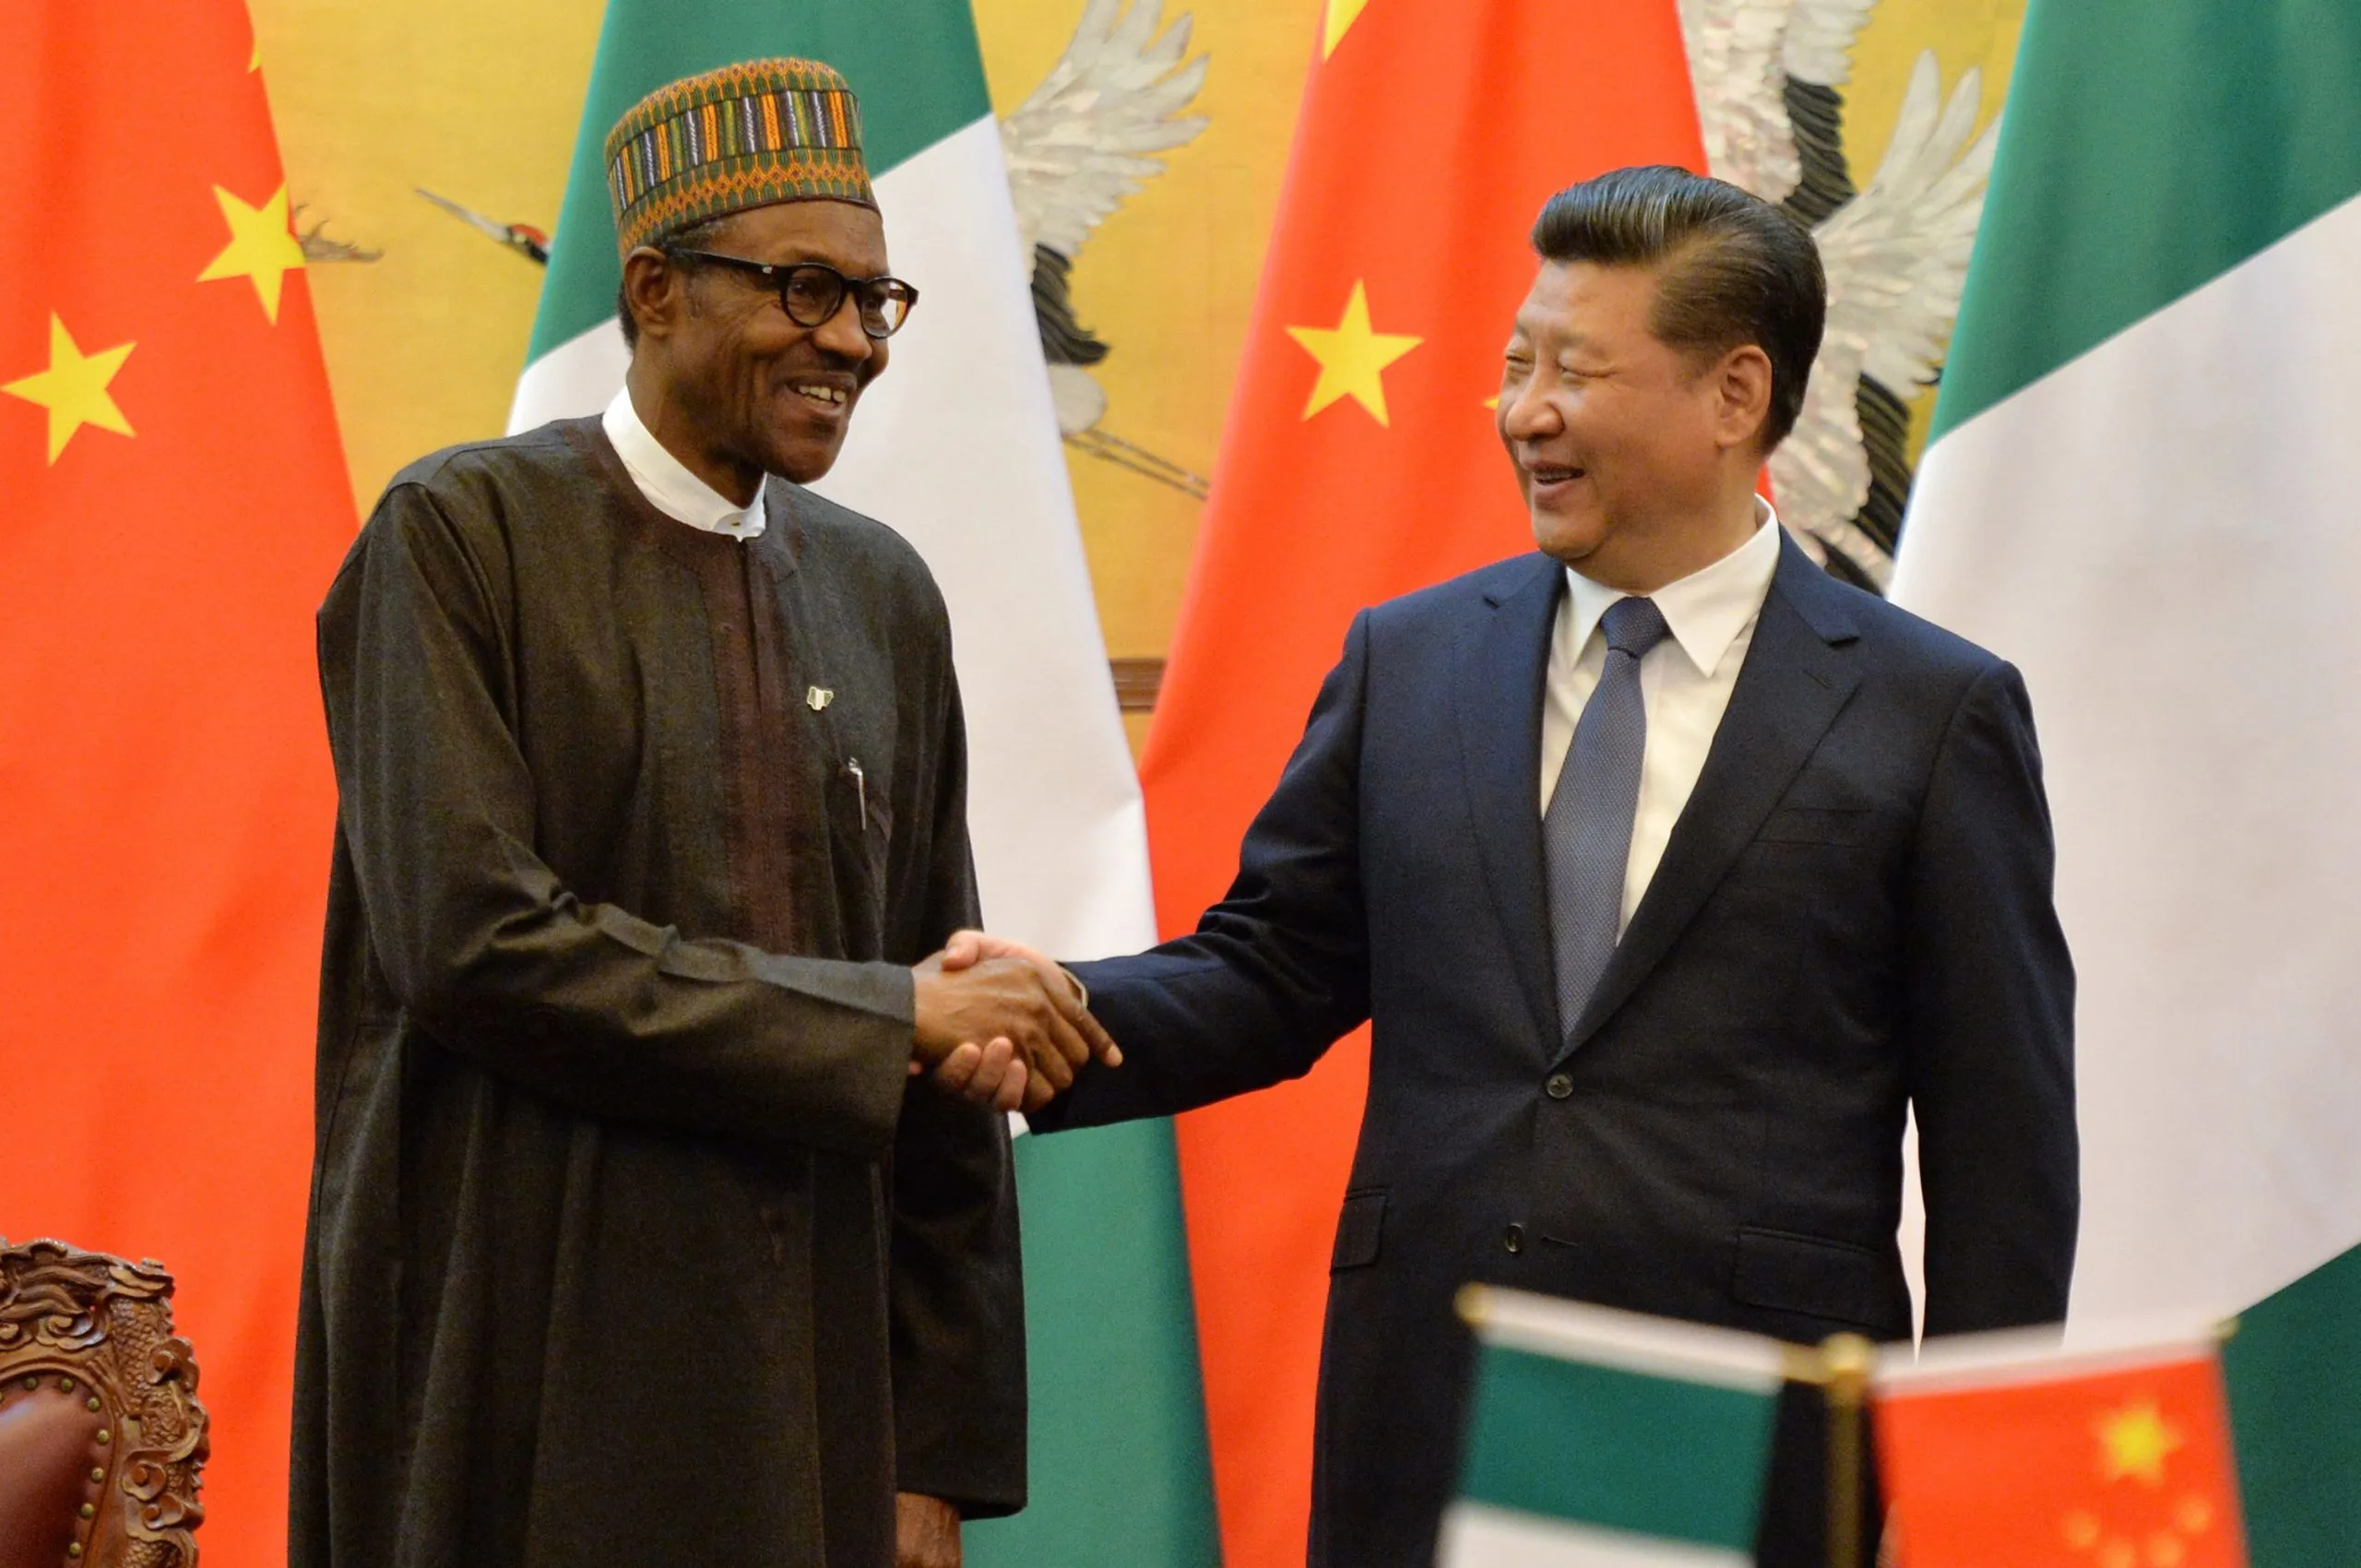 President Buhari congratulates Chinese leader on re-election